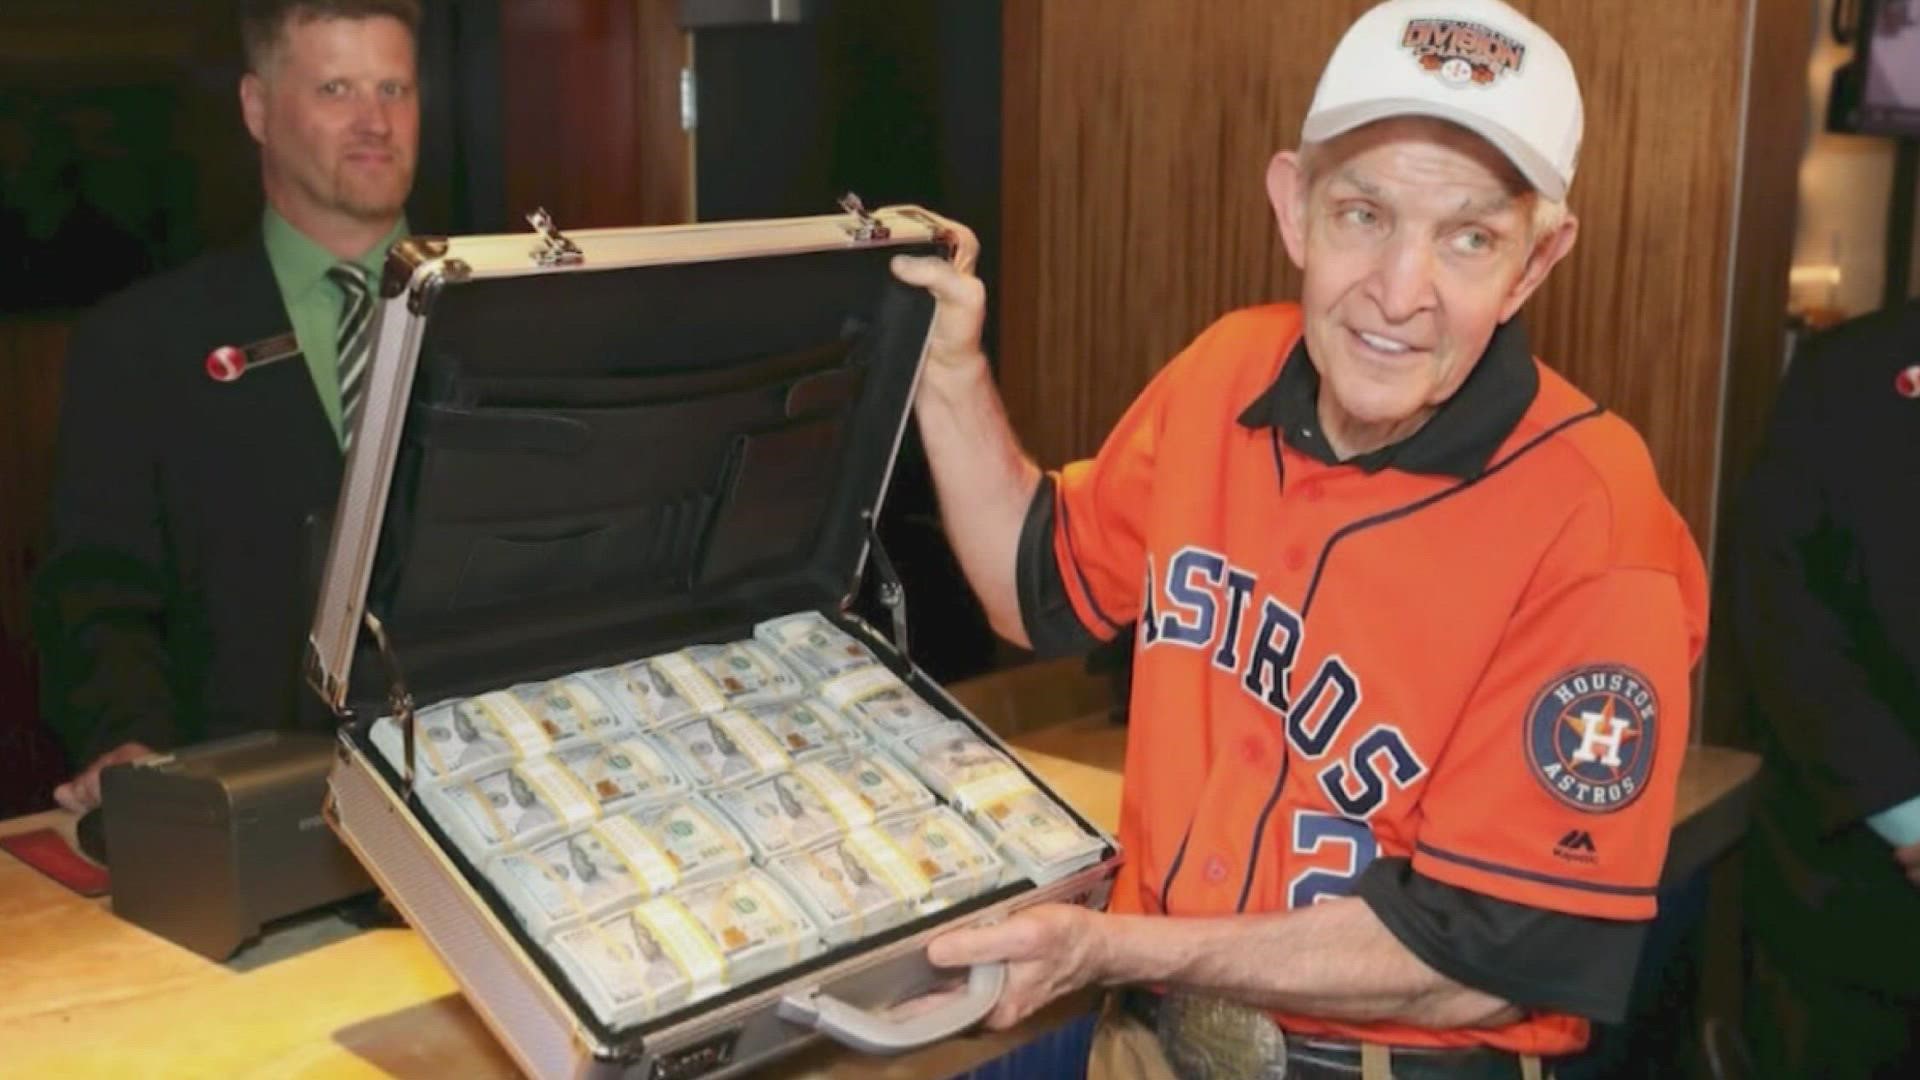 The furniture store owner stands to win $75 million after wagering $10 million between several sportsbooks on the Astros winning it all.